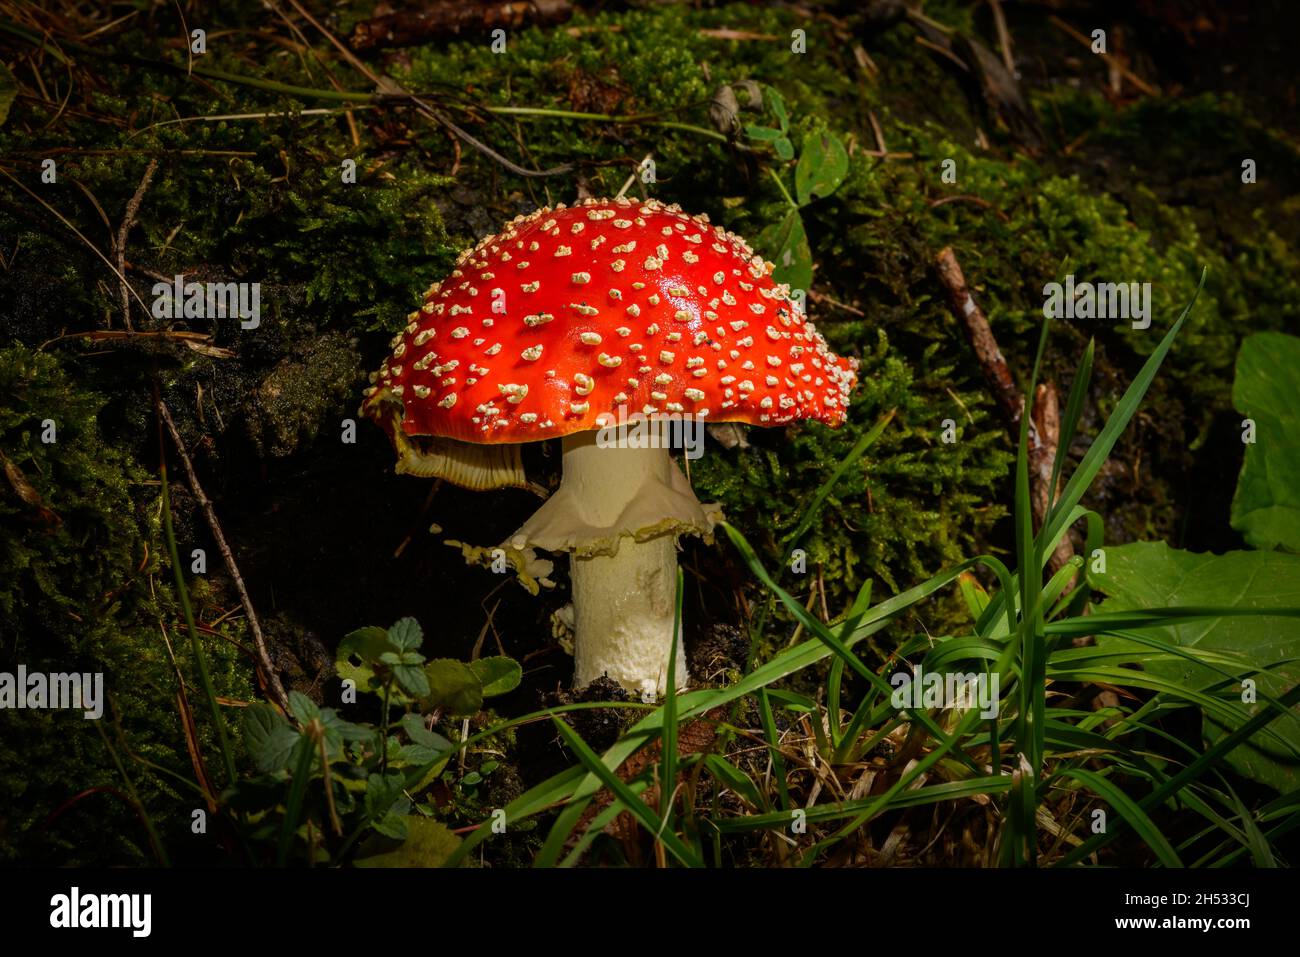 Amanita muscaria, commonly known as the fly agaric mushroom Stock Photo